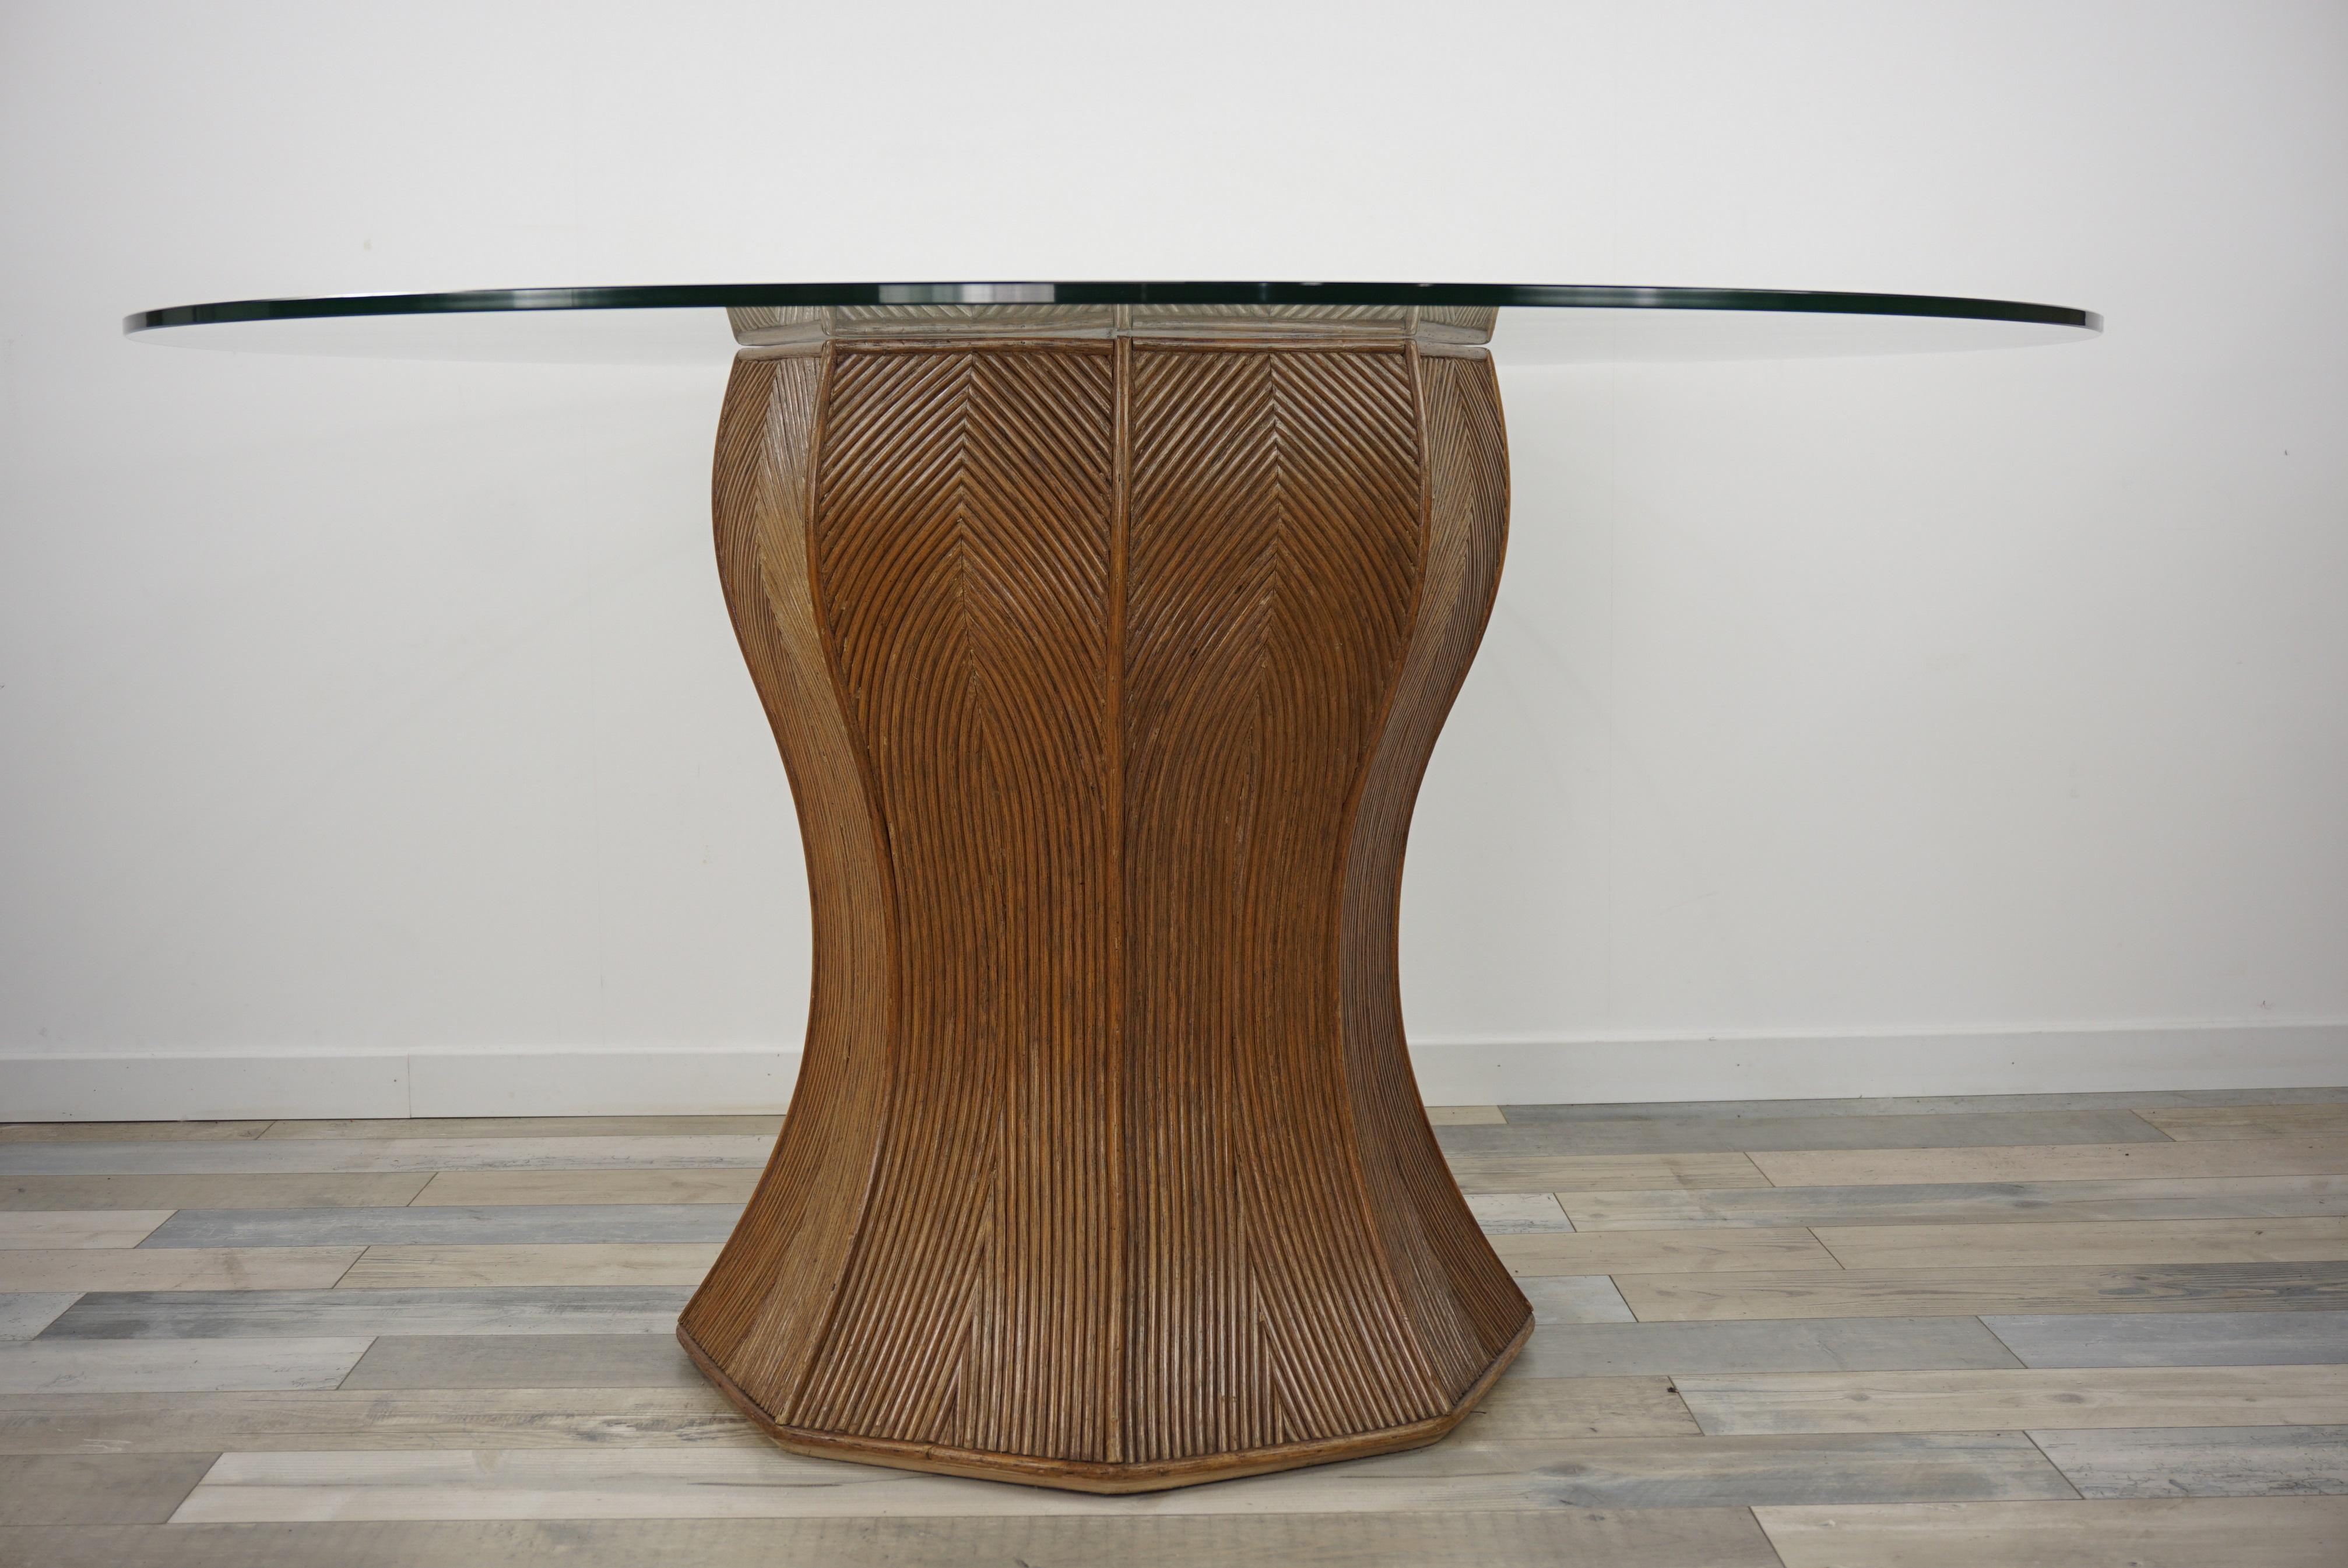 Italian design round pedestal dining table consisting of a generous curved cylindrical (diameter 58cm) and graphic pencil reed base with a round glass top.